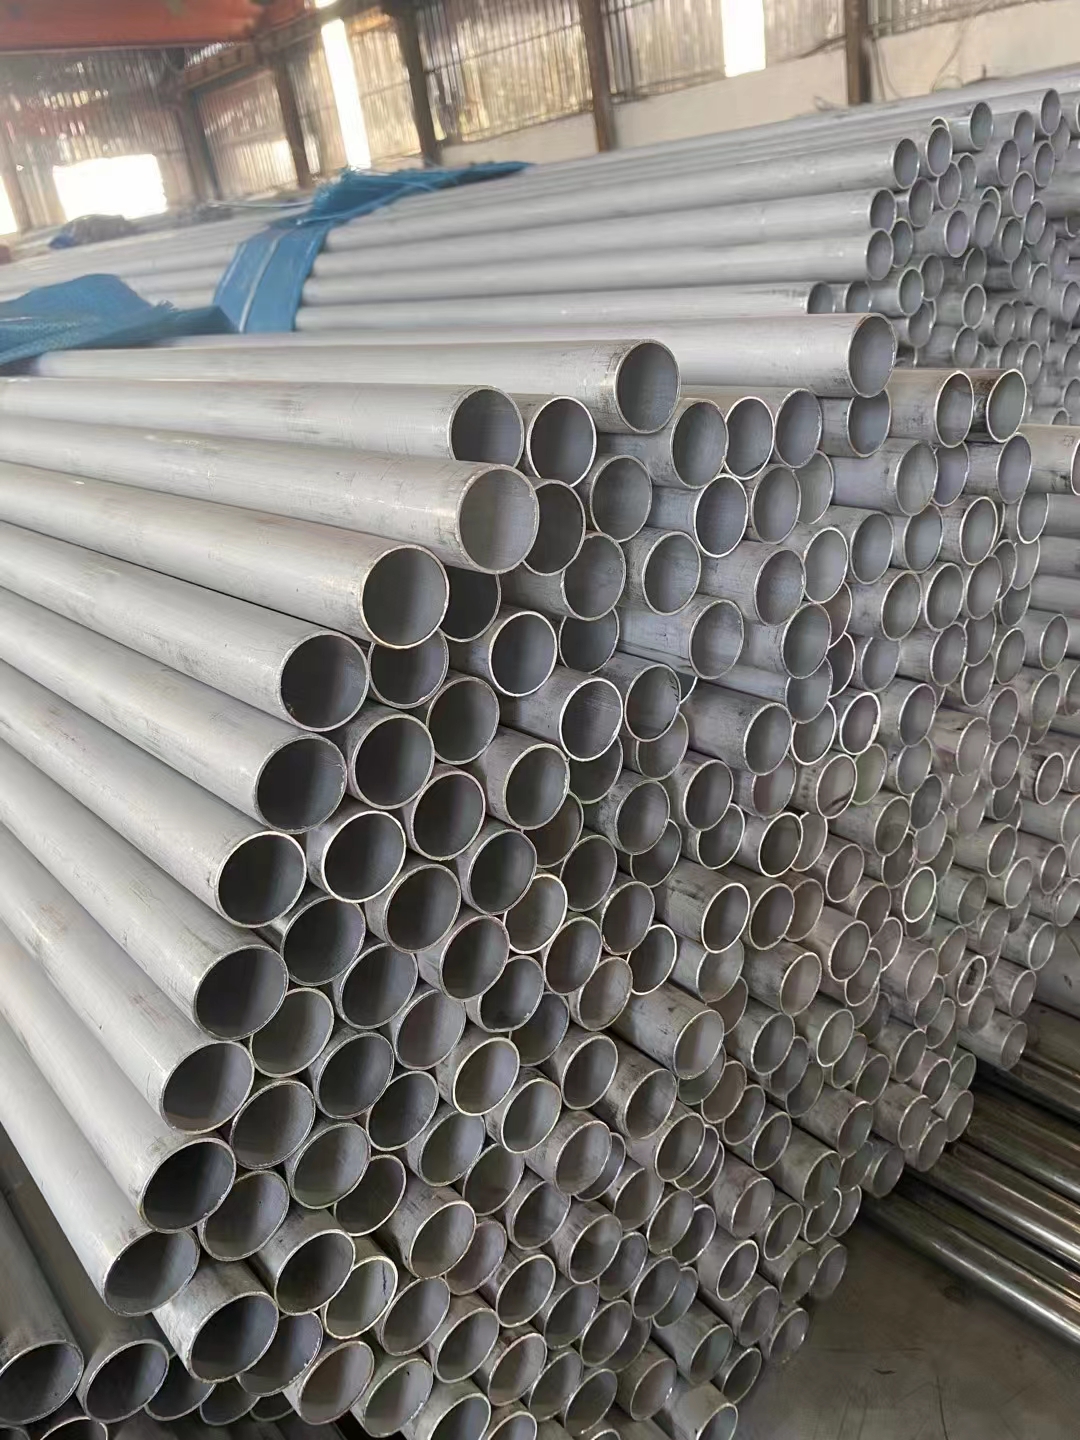 China stainless steel round tube manufacturers can process and customize various specifications and sizes